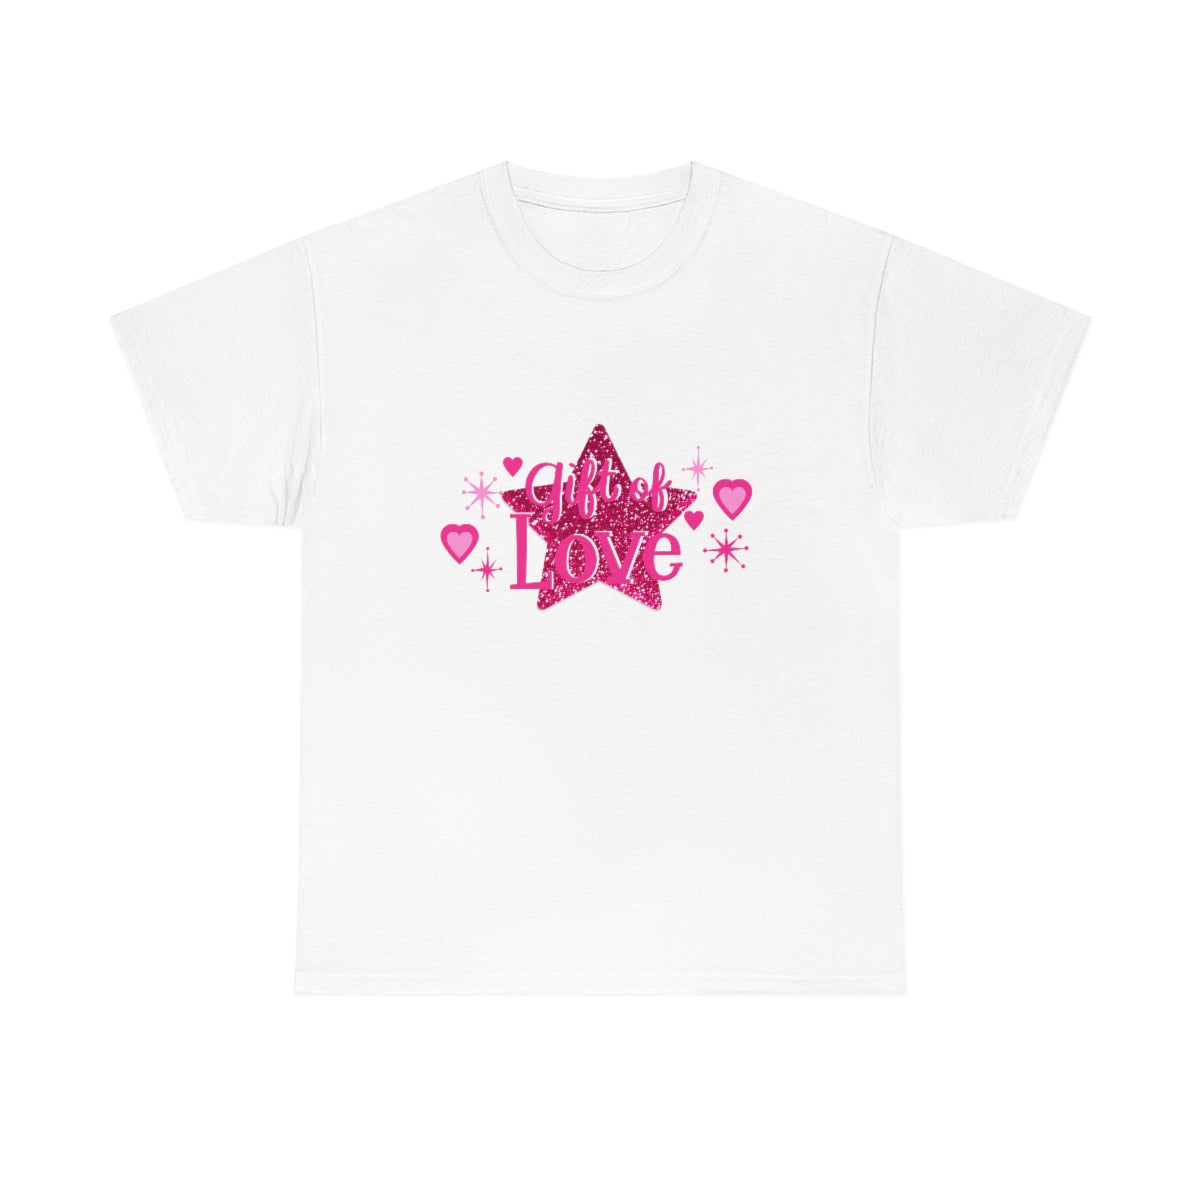 Pink Sparking Star Gift Of Love message Tee shirt